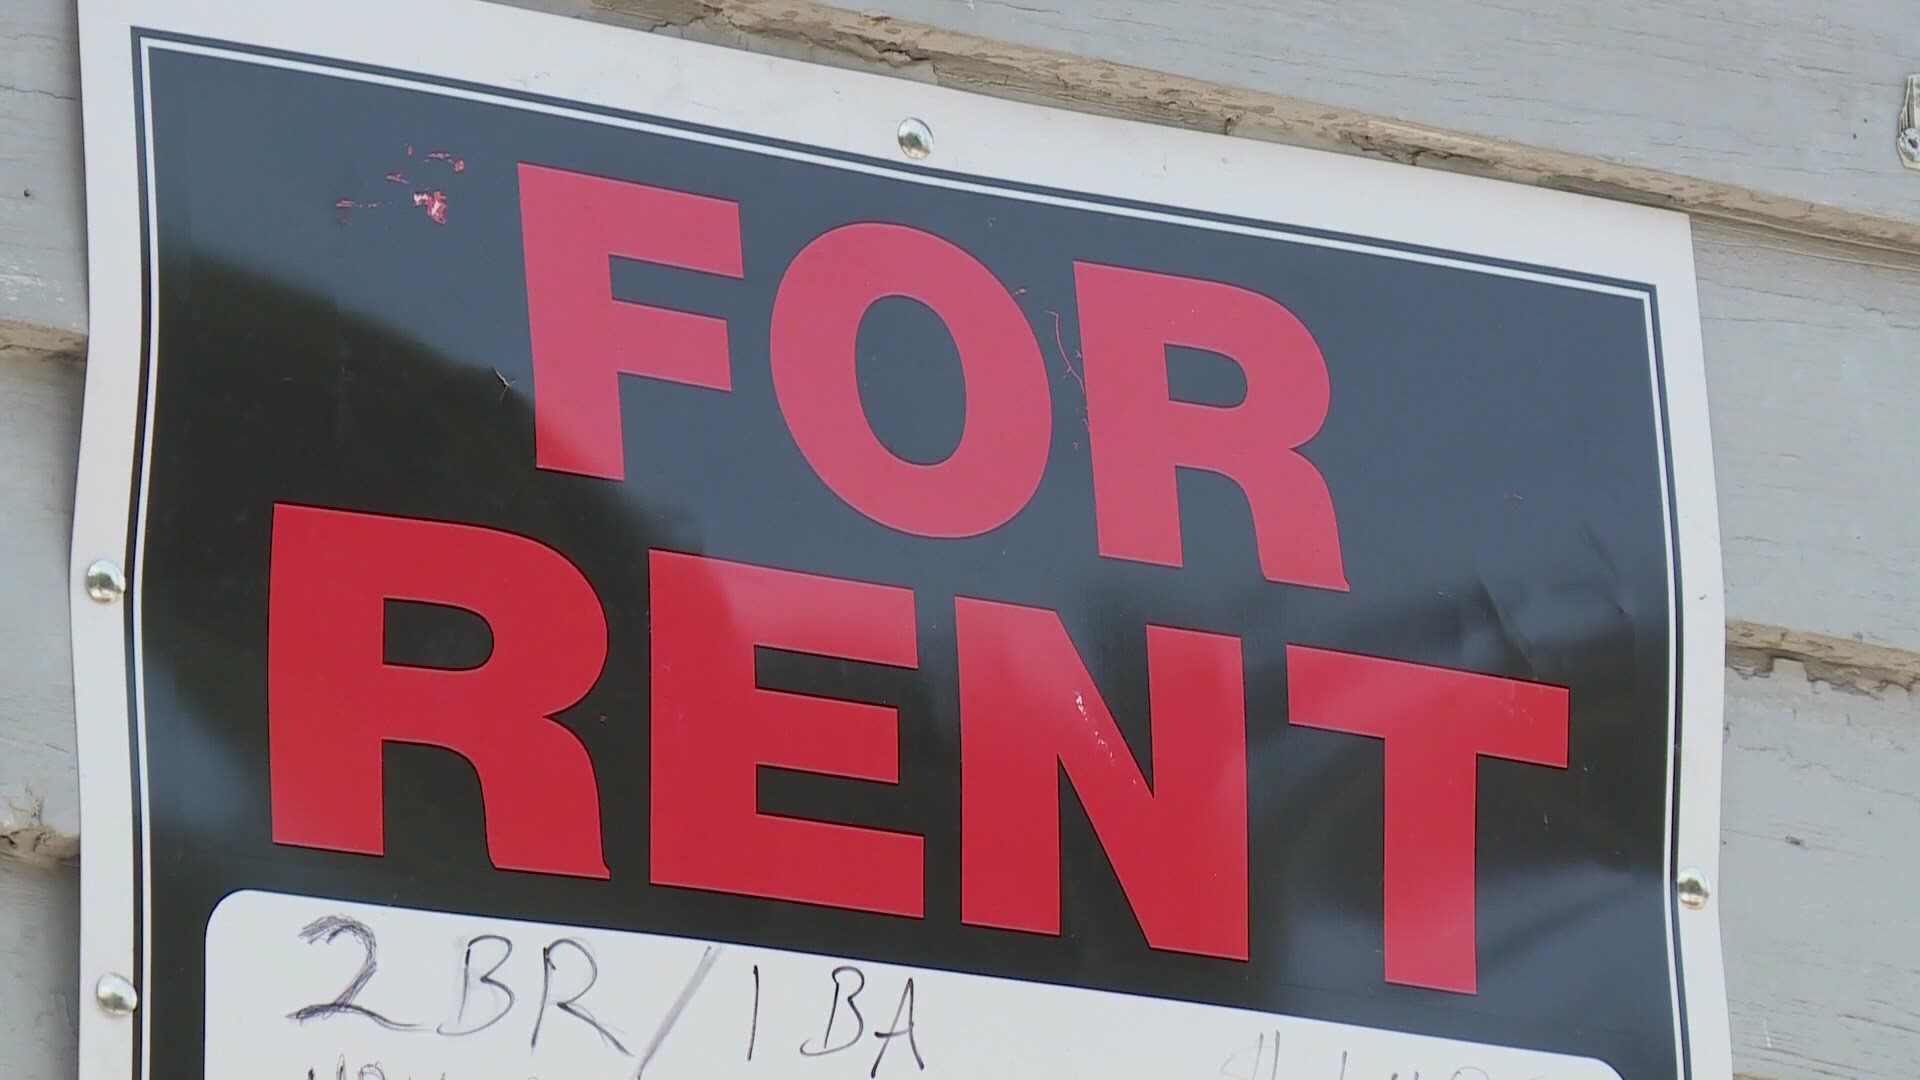 Landlords are in just as much of a struggle as residents that are unable to afford housing.